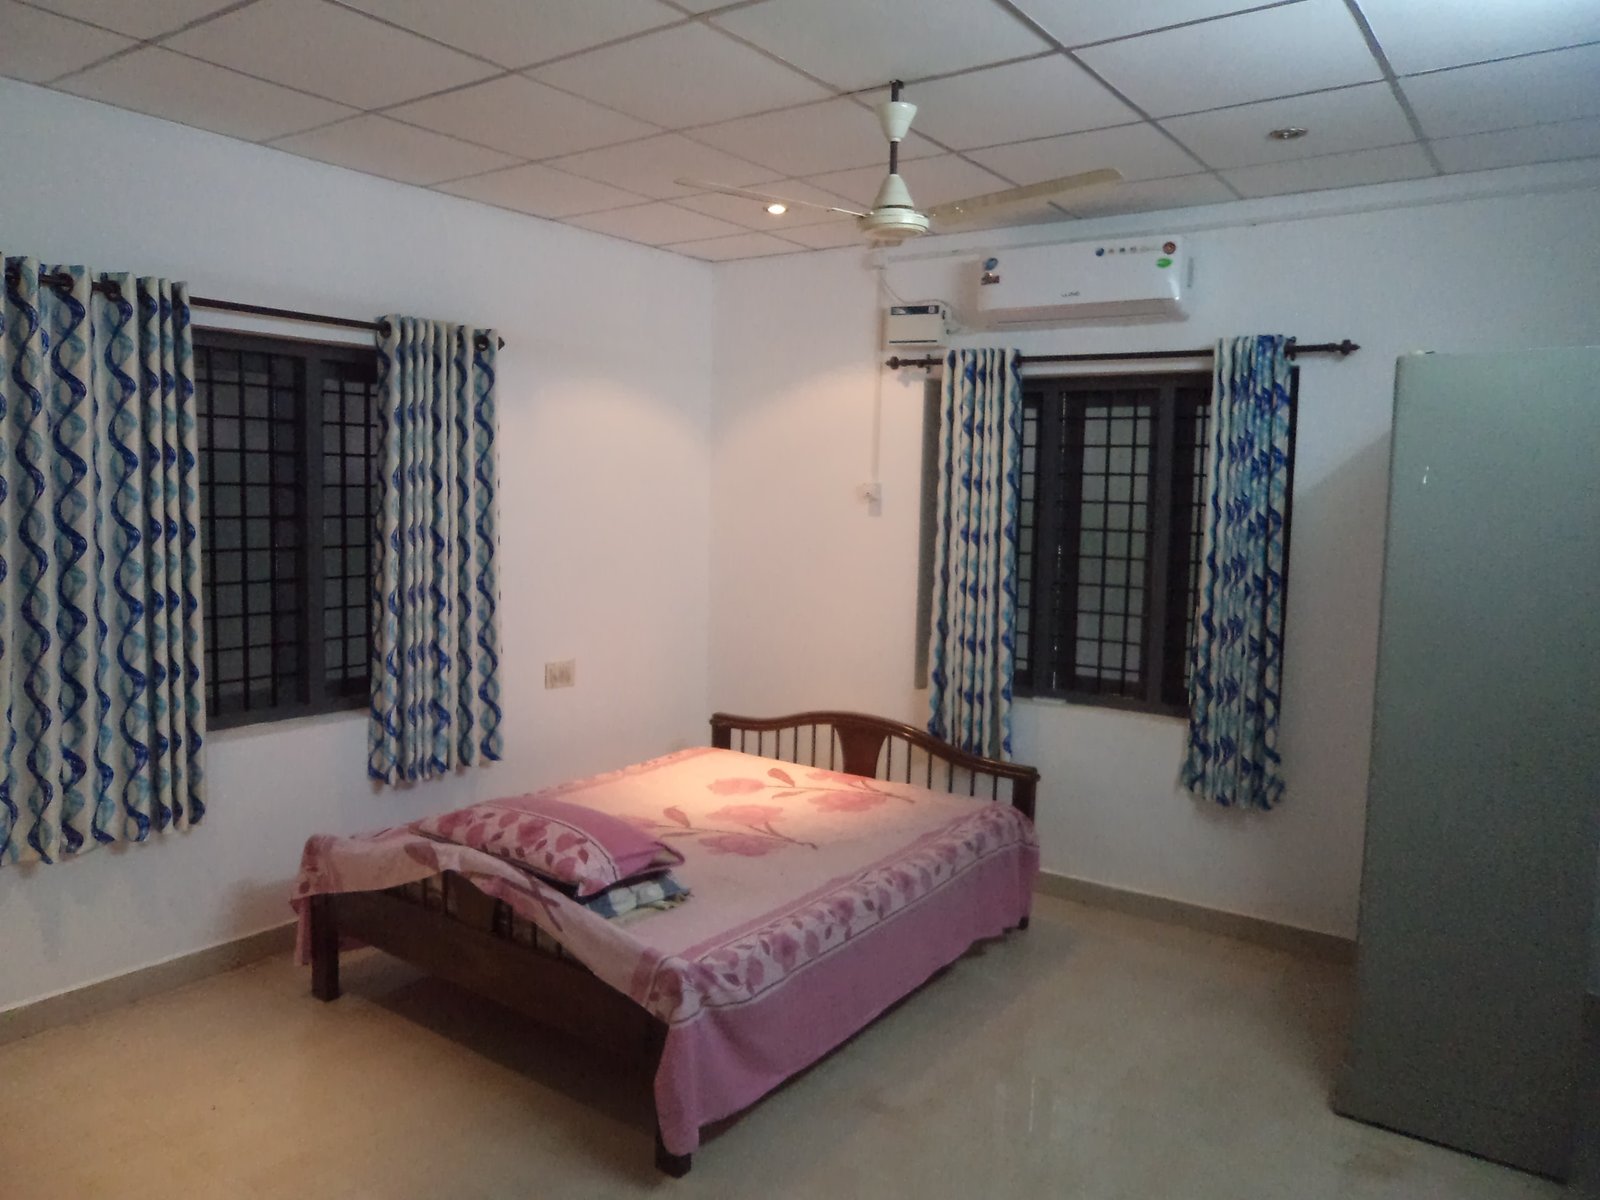 4 bedroom furnished house for ome month rent in kottayam